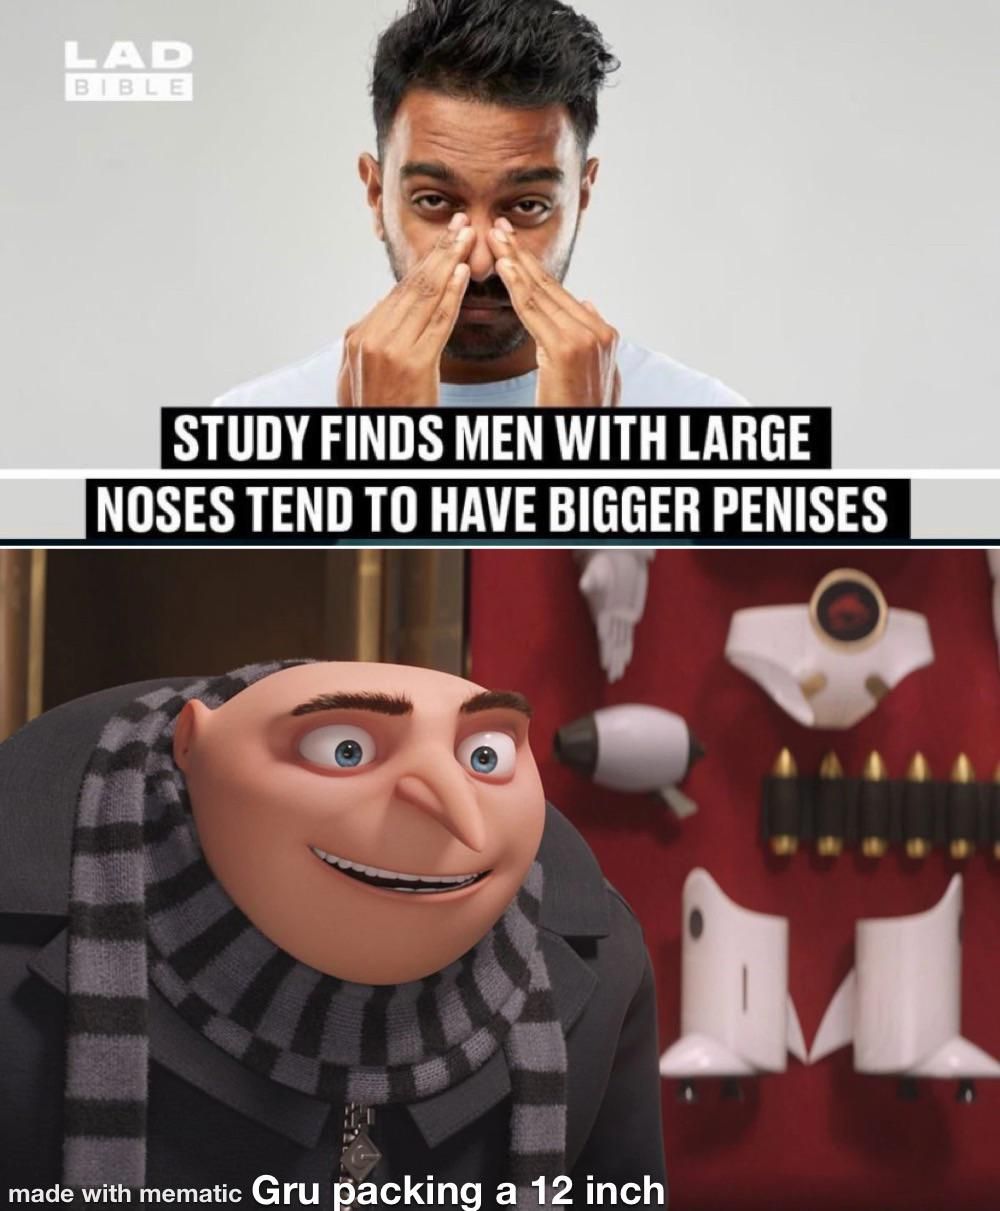 Gru is really using pp power.